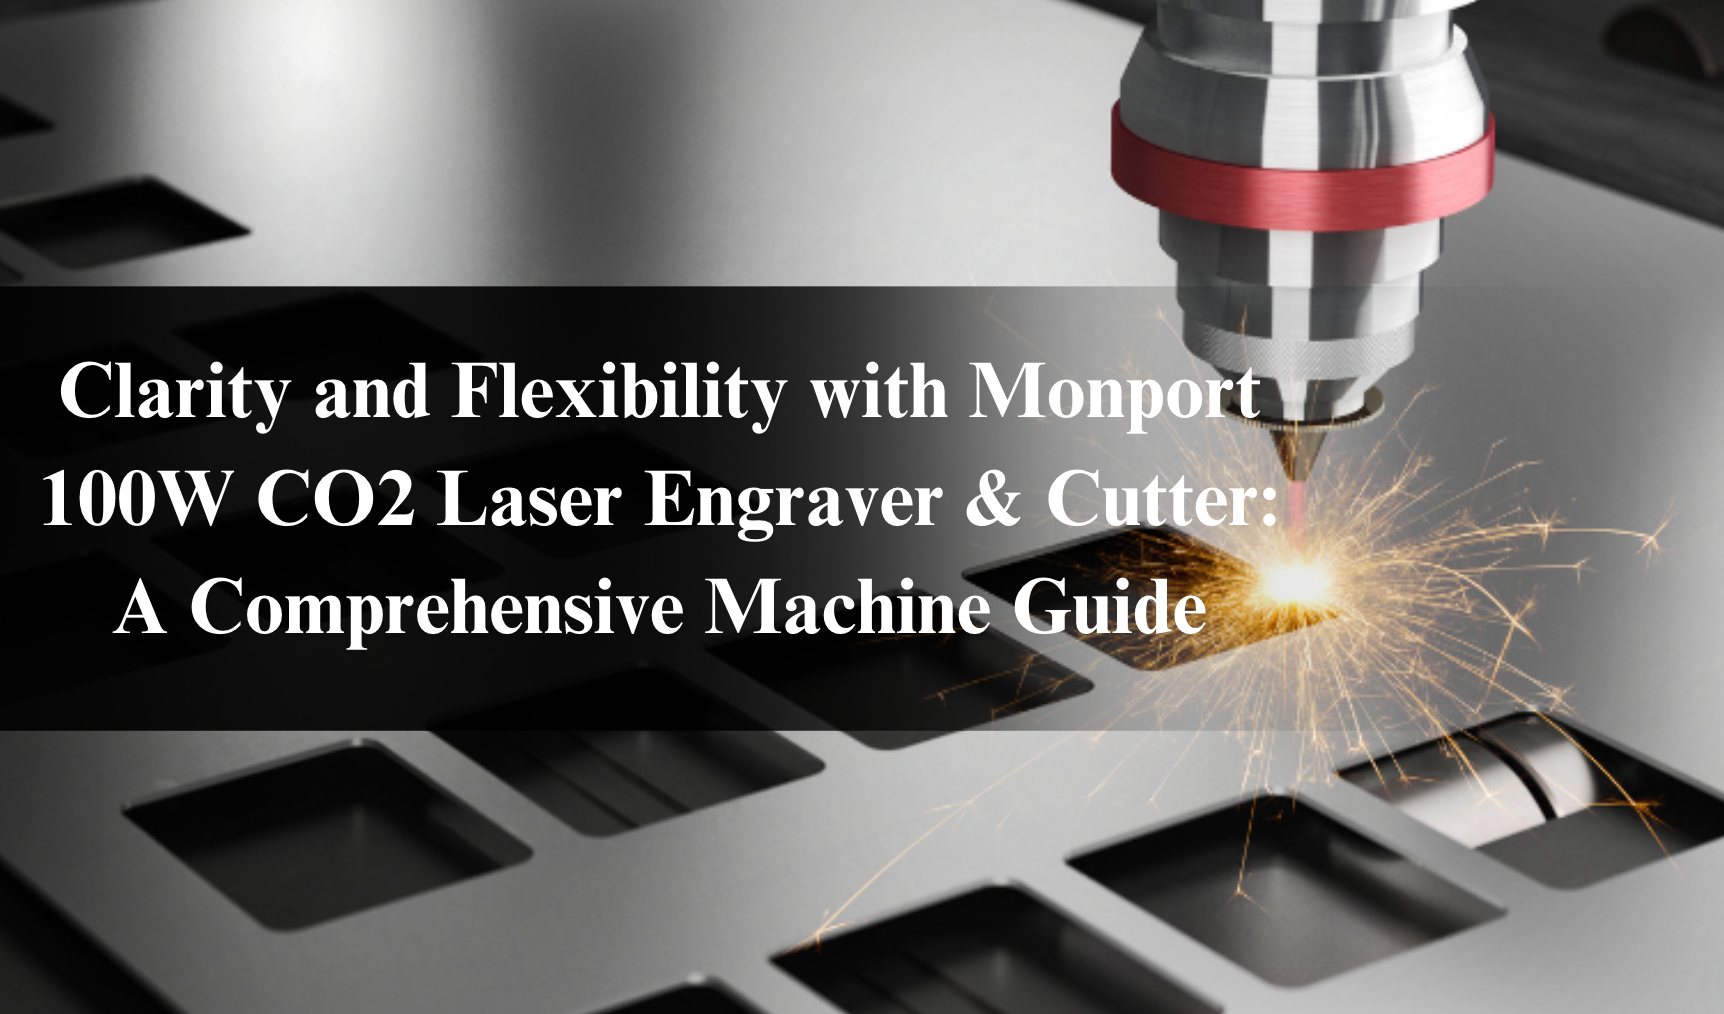 Clarity and Flexibility with Monport 100W CO2 Laser Engraver & Cutter: A Comprehensive Machine Guide